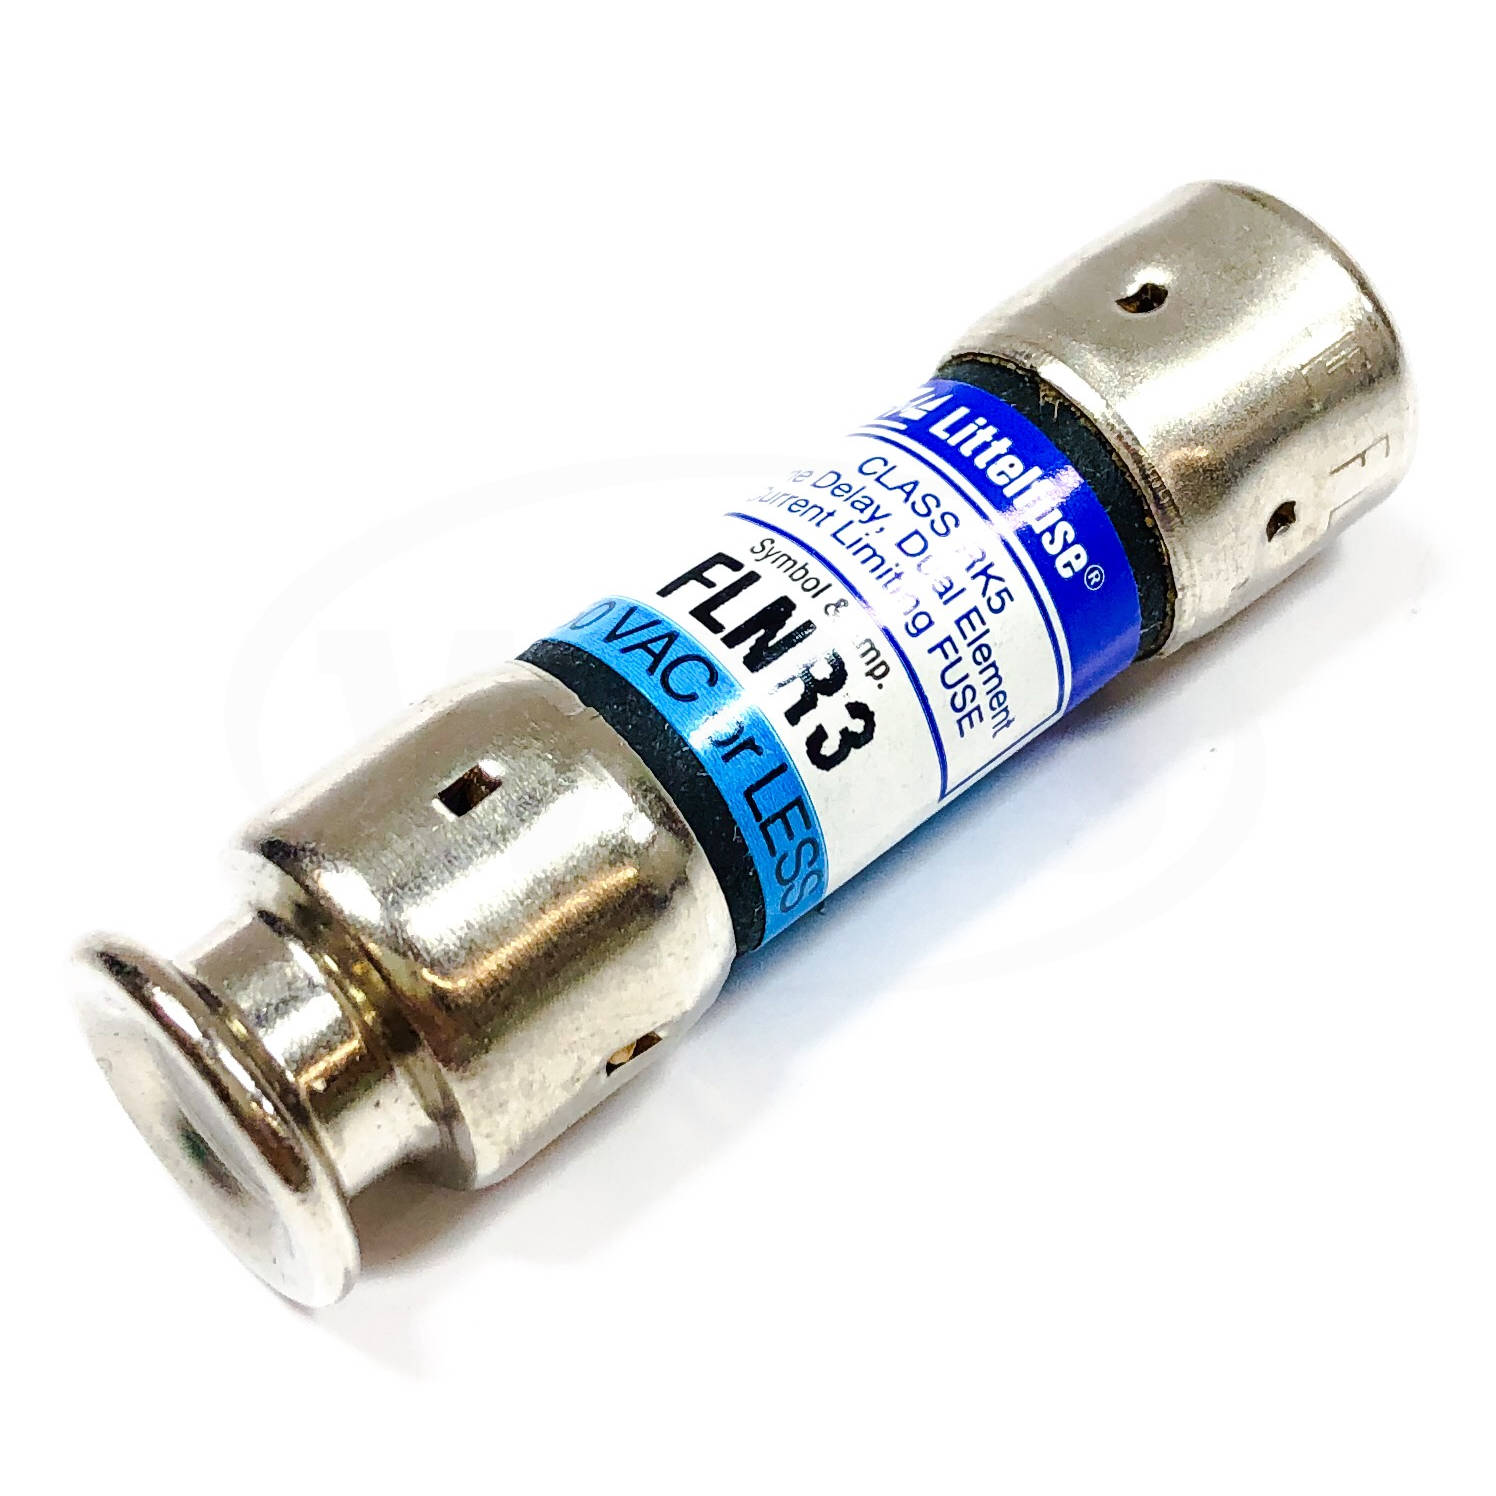 Details about   New Littelfuse FLNR 250 ID 250 Amp Buss Fuse With Indicator FLNR250ID RK5 